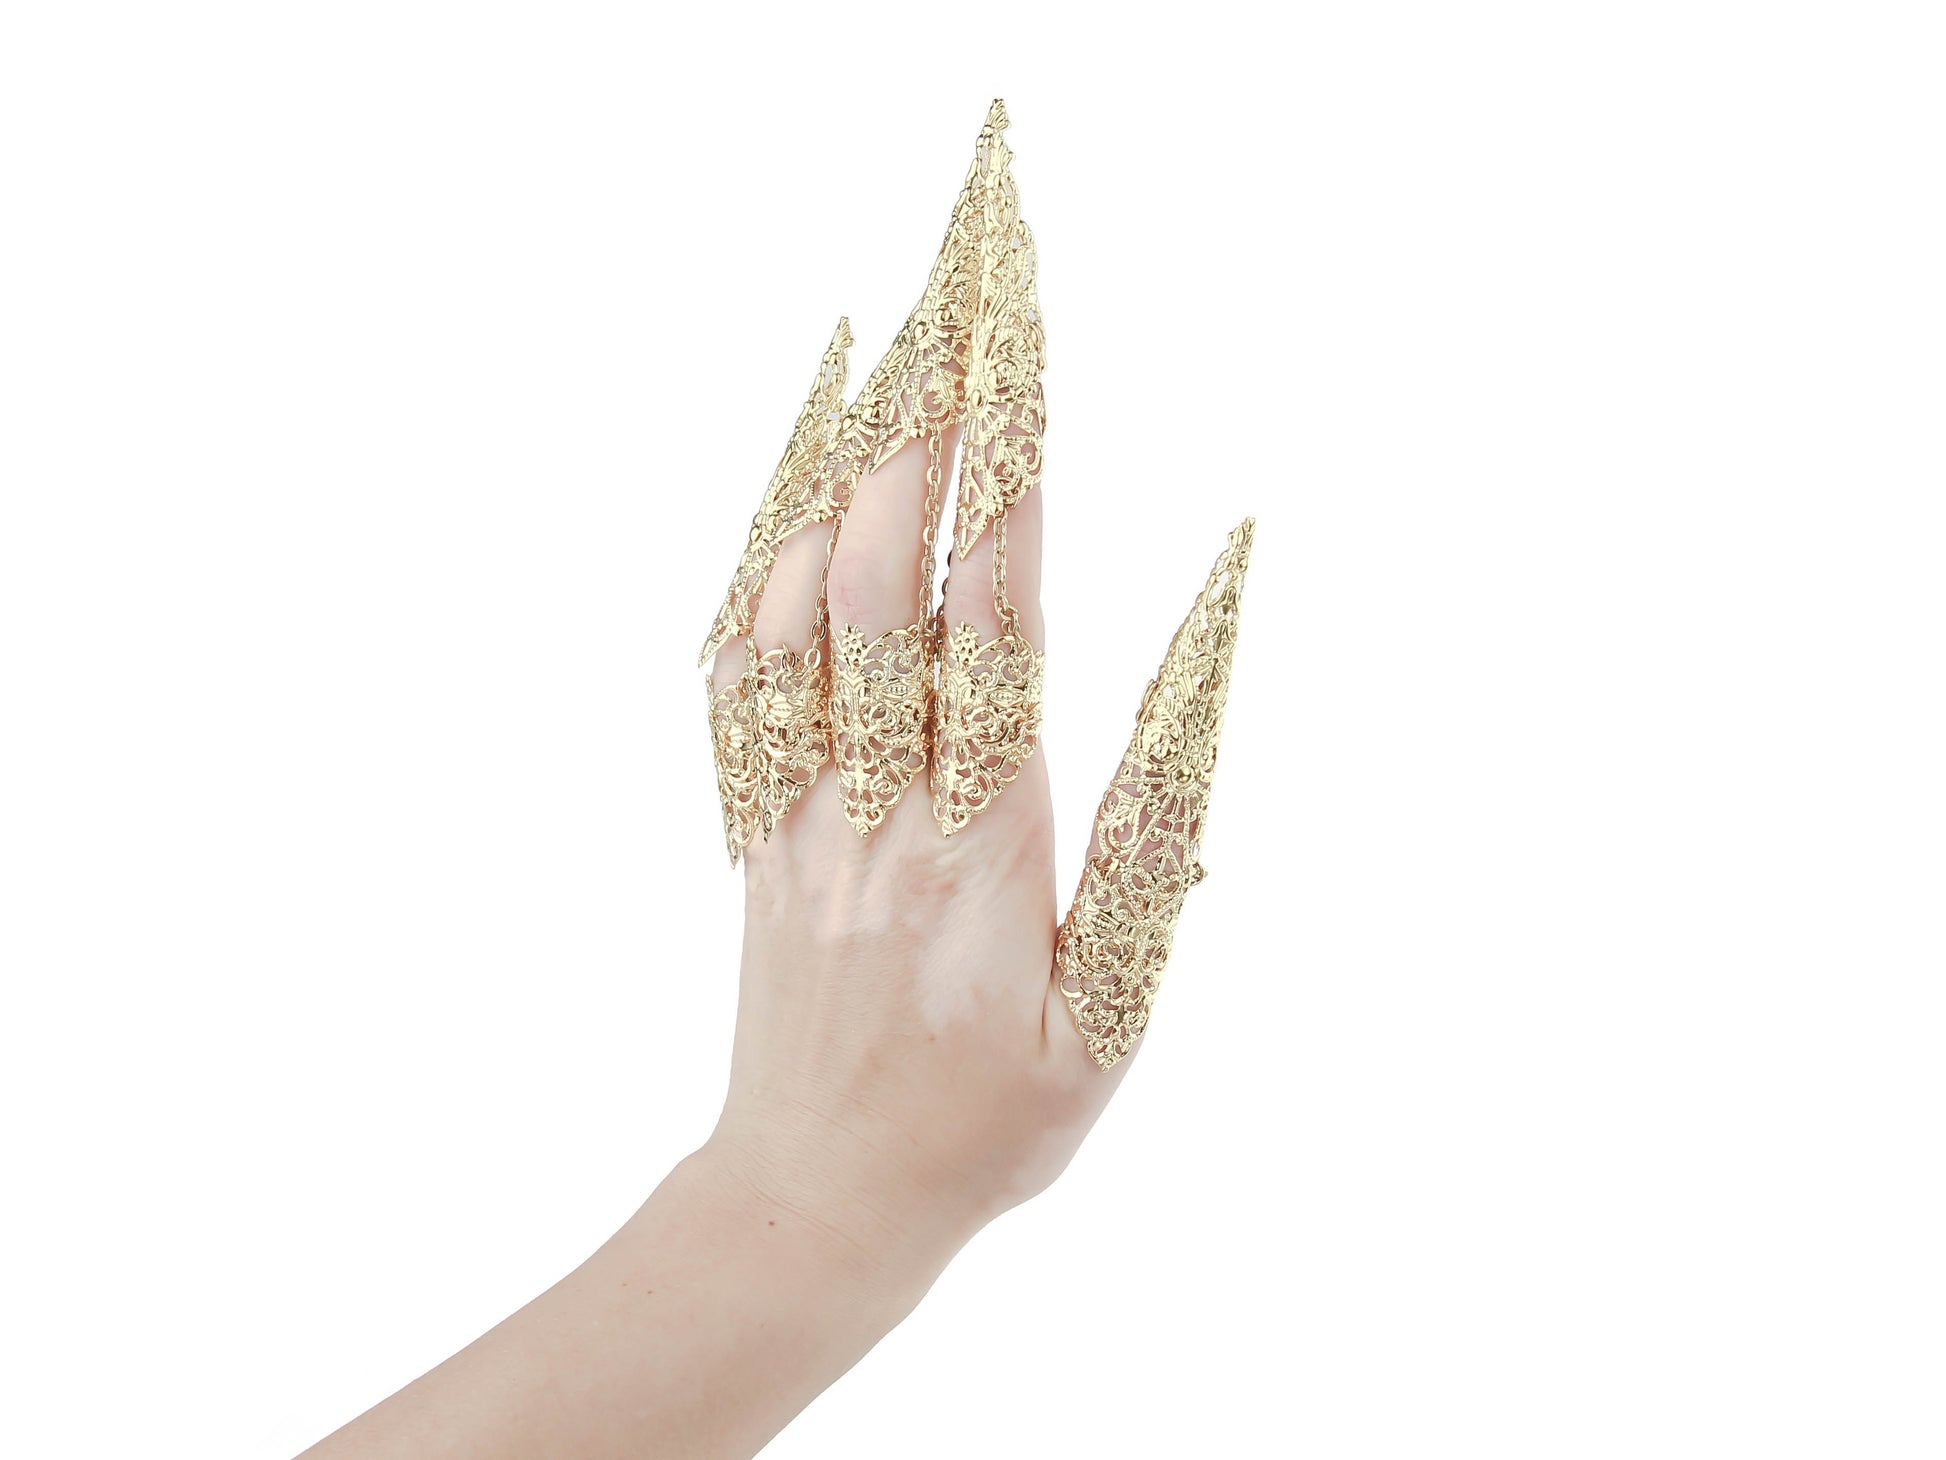 A hand showcases a full set of Myril Jewels' armored rings, each extending into long, ornate claws that embody the essence of neo-gothic artistry. These gold claw rings, perfect for gothic, punk, and witchcore enthusiasts, are versatile for Halloween, everyday dark avant-garde fashion, and standout pieces for rave or festival wear, as well as bold drag queen statements.